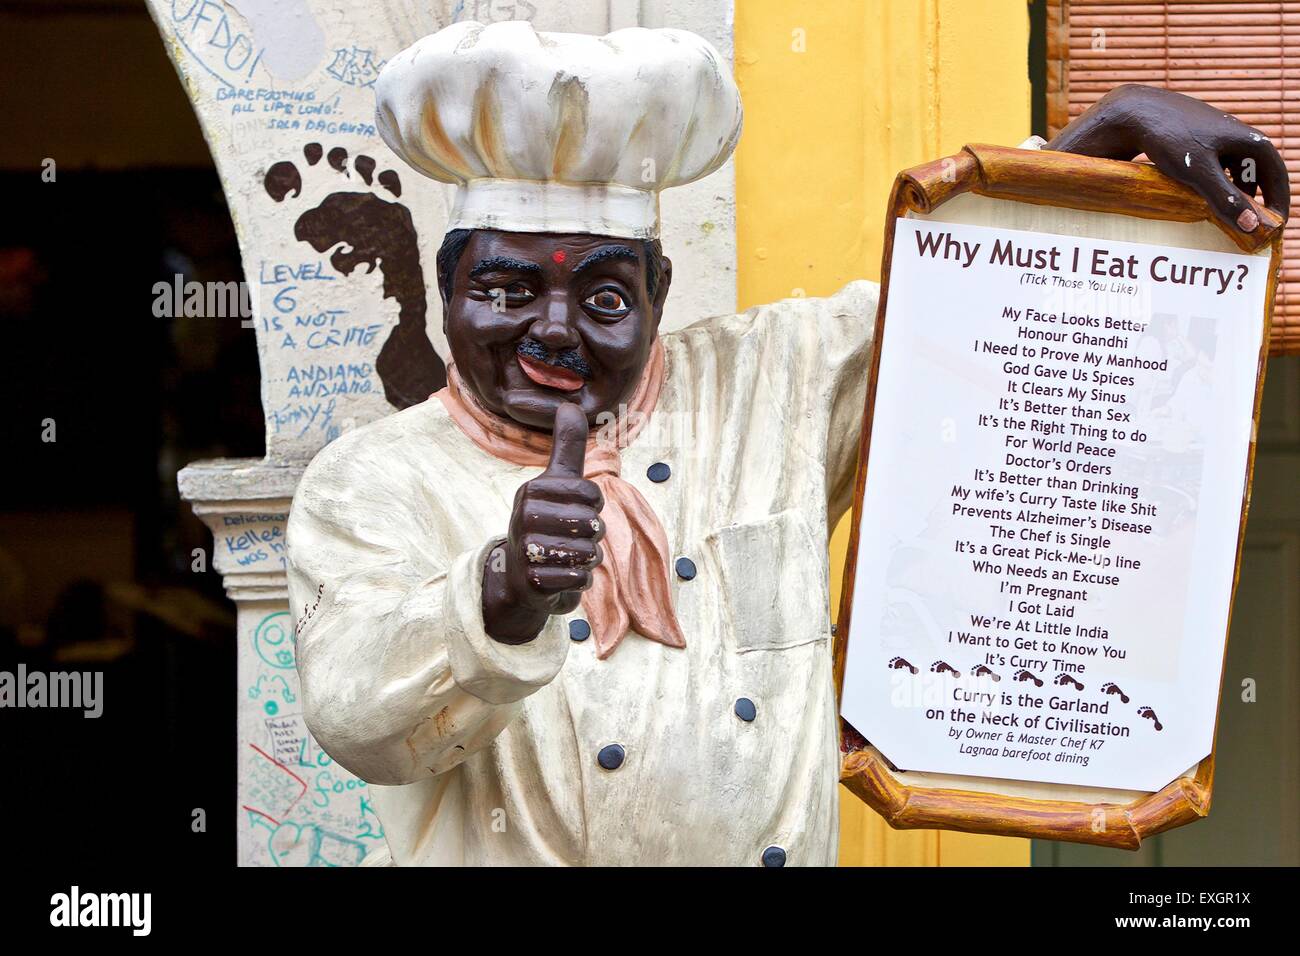 Why Must I Eat Curry ? Quirky Statue Of An Indian Chef Outside An Indian Restaurant In Little India, Singapore. Stock Photo